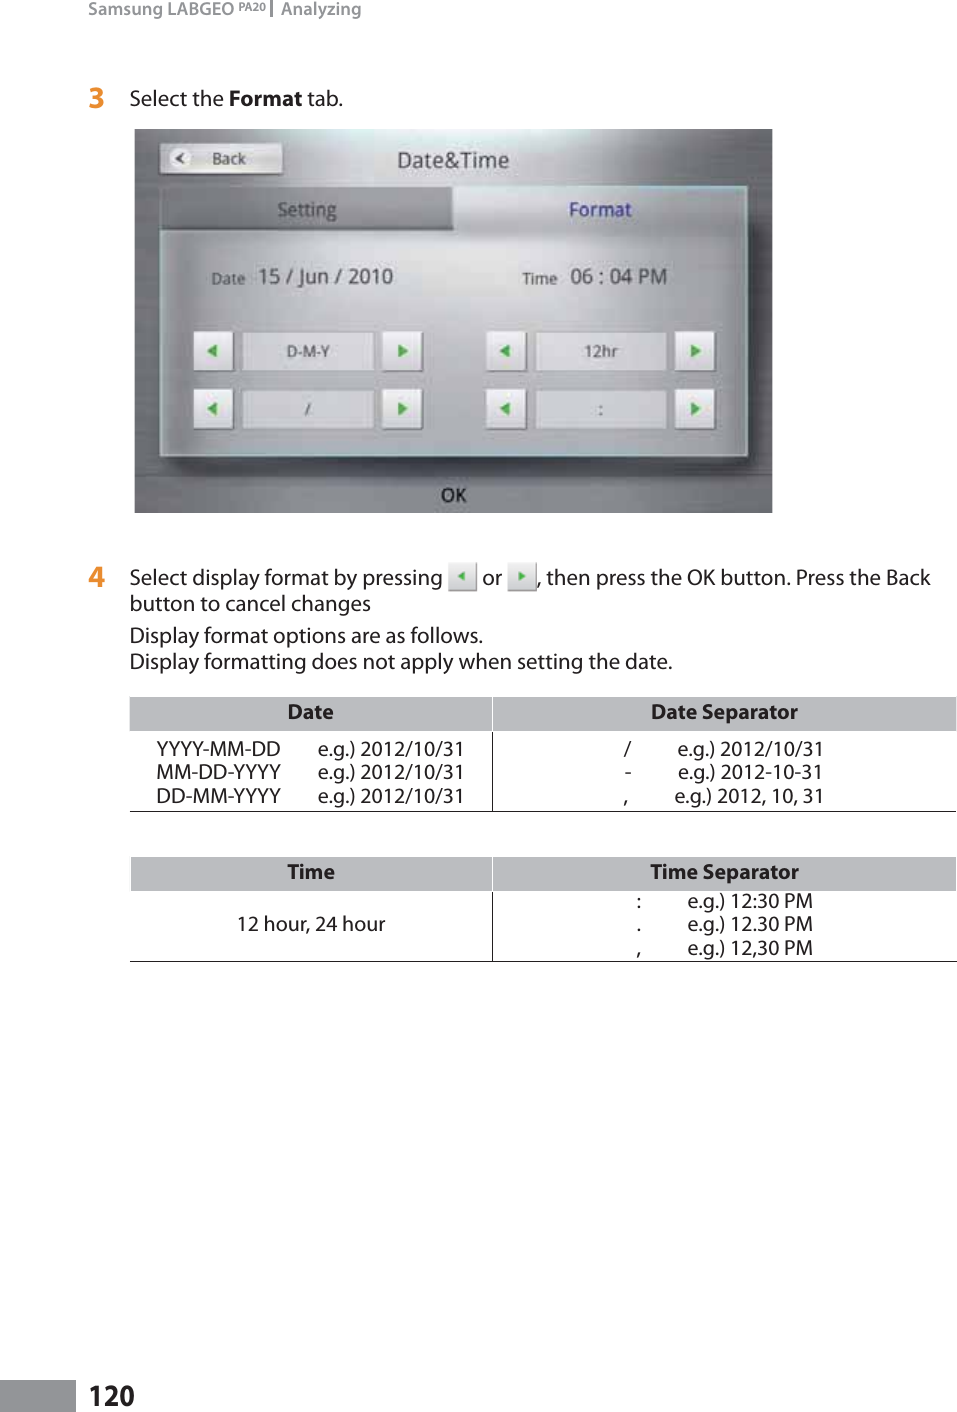 120Samsung LABGEO PA20   Analyzing3  Select the Format tab. 4  Select display format by pressing   or  , then press the OK button. Press the Back button to cancel changesDisplay format options are as follows. Display formatting does not apply when setting the date.Date Date SeparatorYYYY-MM-DD        e.g.) 2012/10/31MM-DD-YYYY        e.g.) 2012/10/31DD-MM-YYYY        e.g.) 2012/10/31/          e.g.) 2012/10/31-          e.g.) 2012-10-31,          e.g.) 2012, 10, 31Time Time Separator12 hour, 24 hour:          e.g.) 12:30 PM.          e.g.) 12.30 PM,          e.g.) 12,30 PM